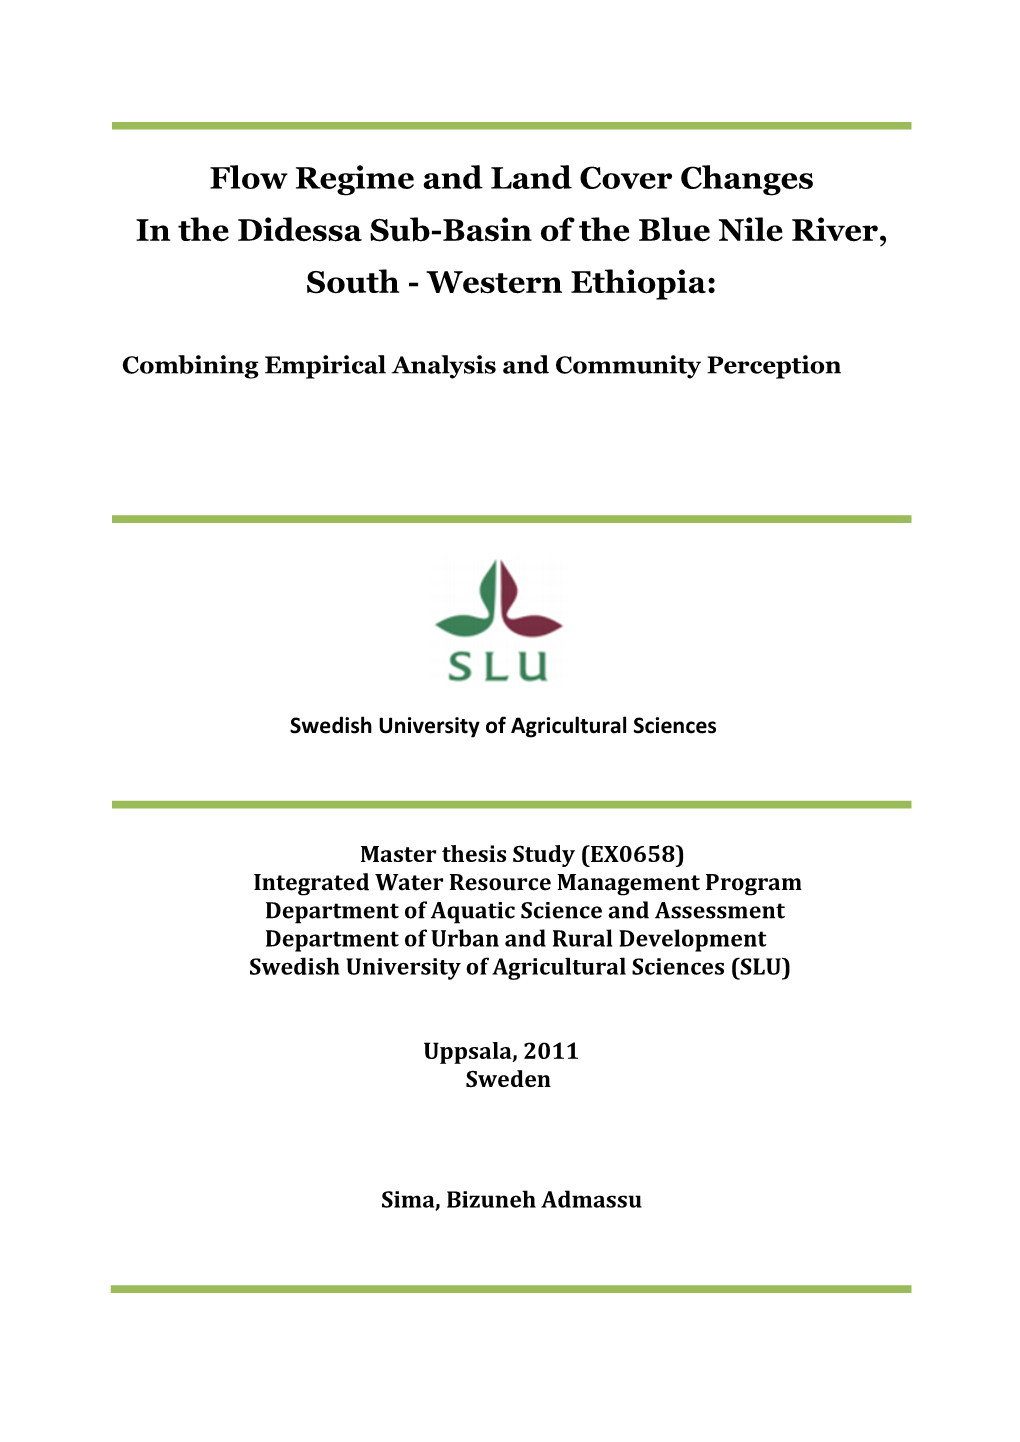 Flow Regime and Land Cover Changes in the Didessa Sub-Basin of the Blue Nile River, South - Western Ethiopia